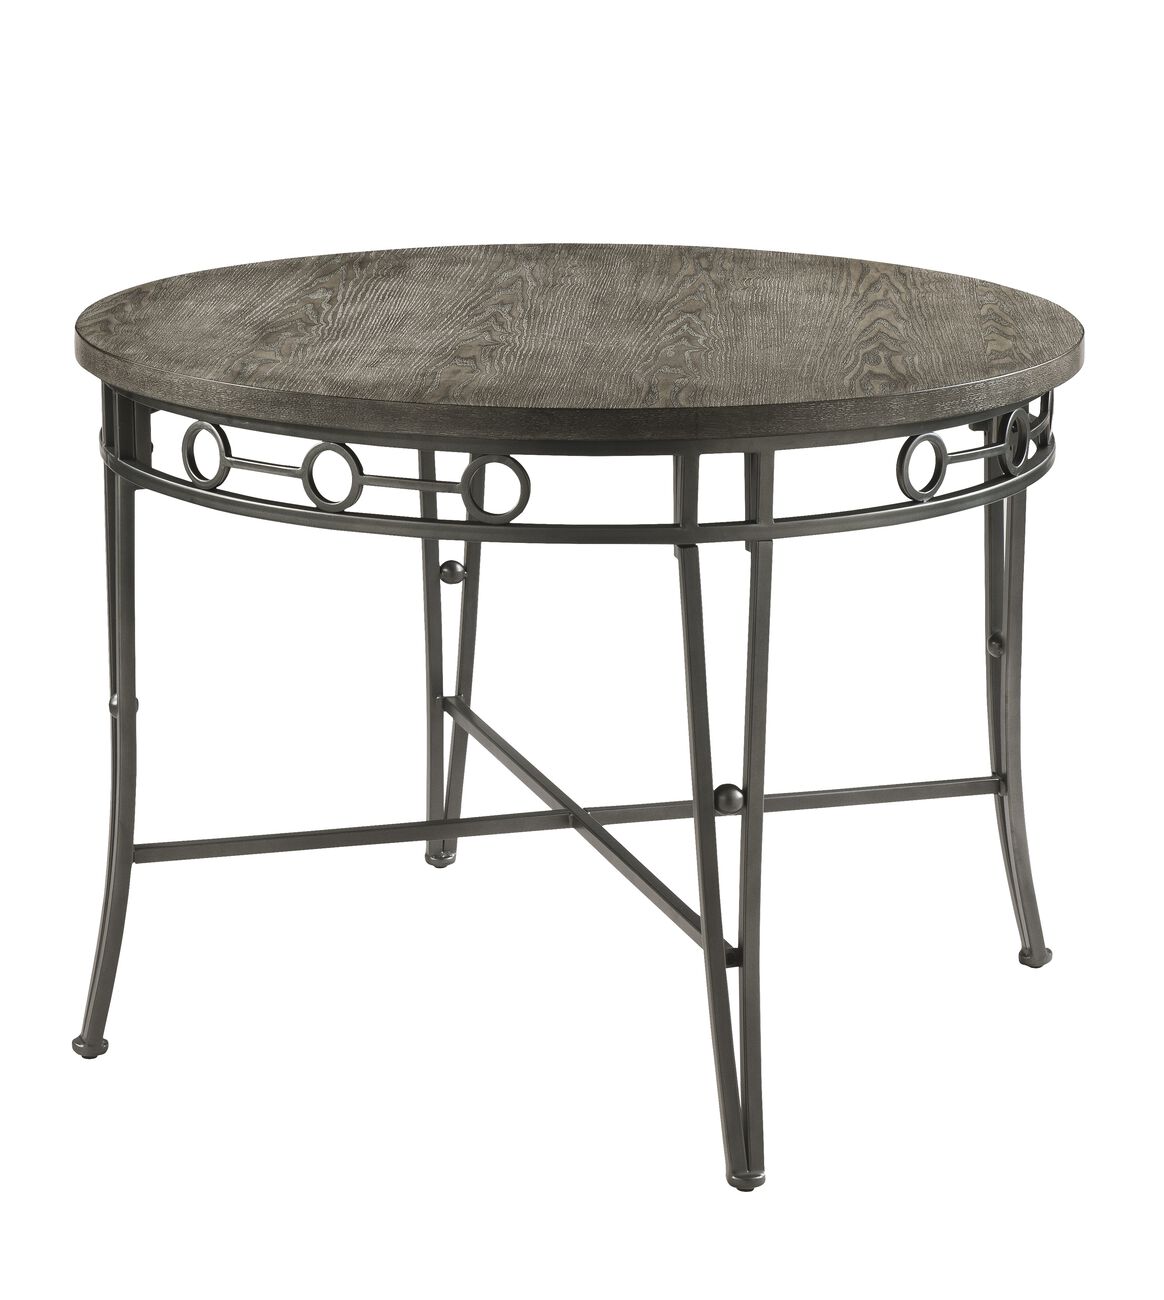 Round Dining Table with Wooden Top and Geometric Metal Accents, Gray